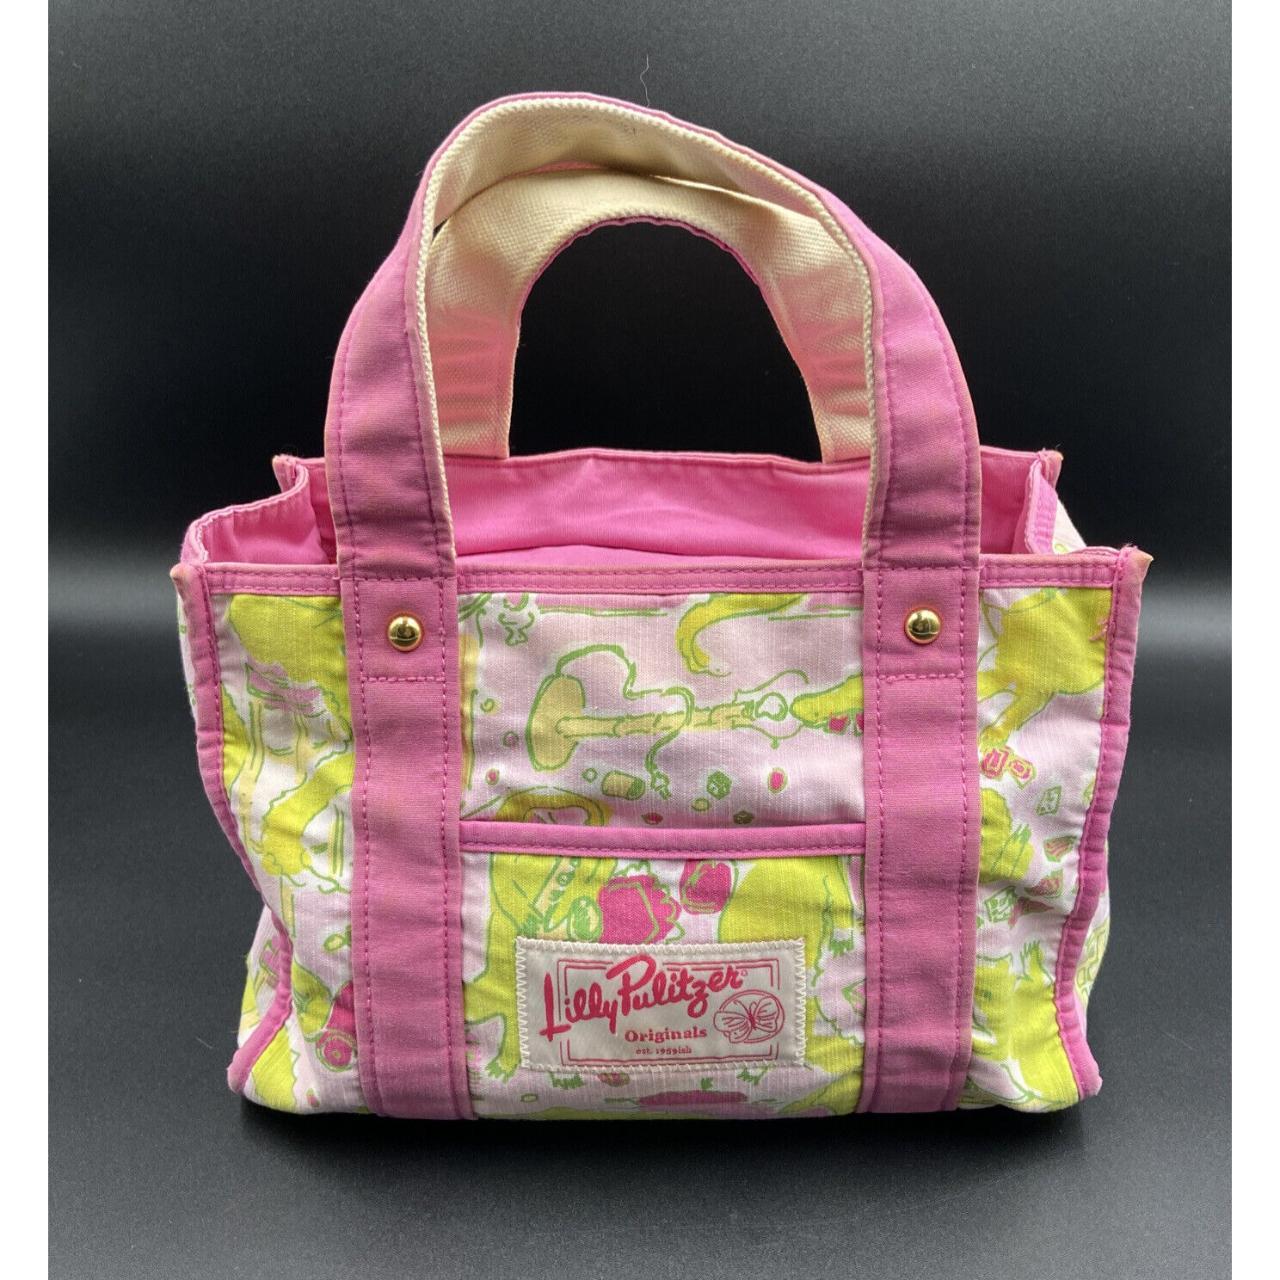 Lilly Pulitzer Women's multi Bag